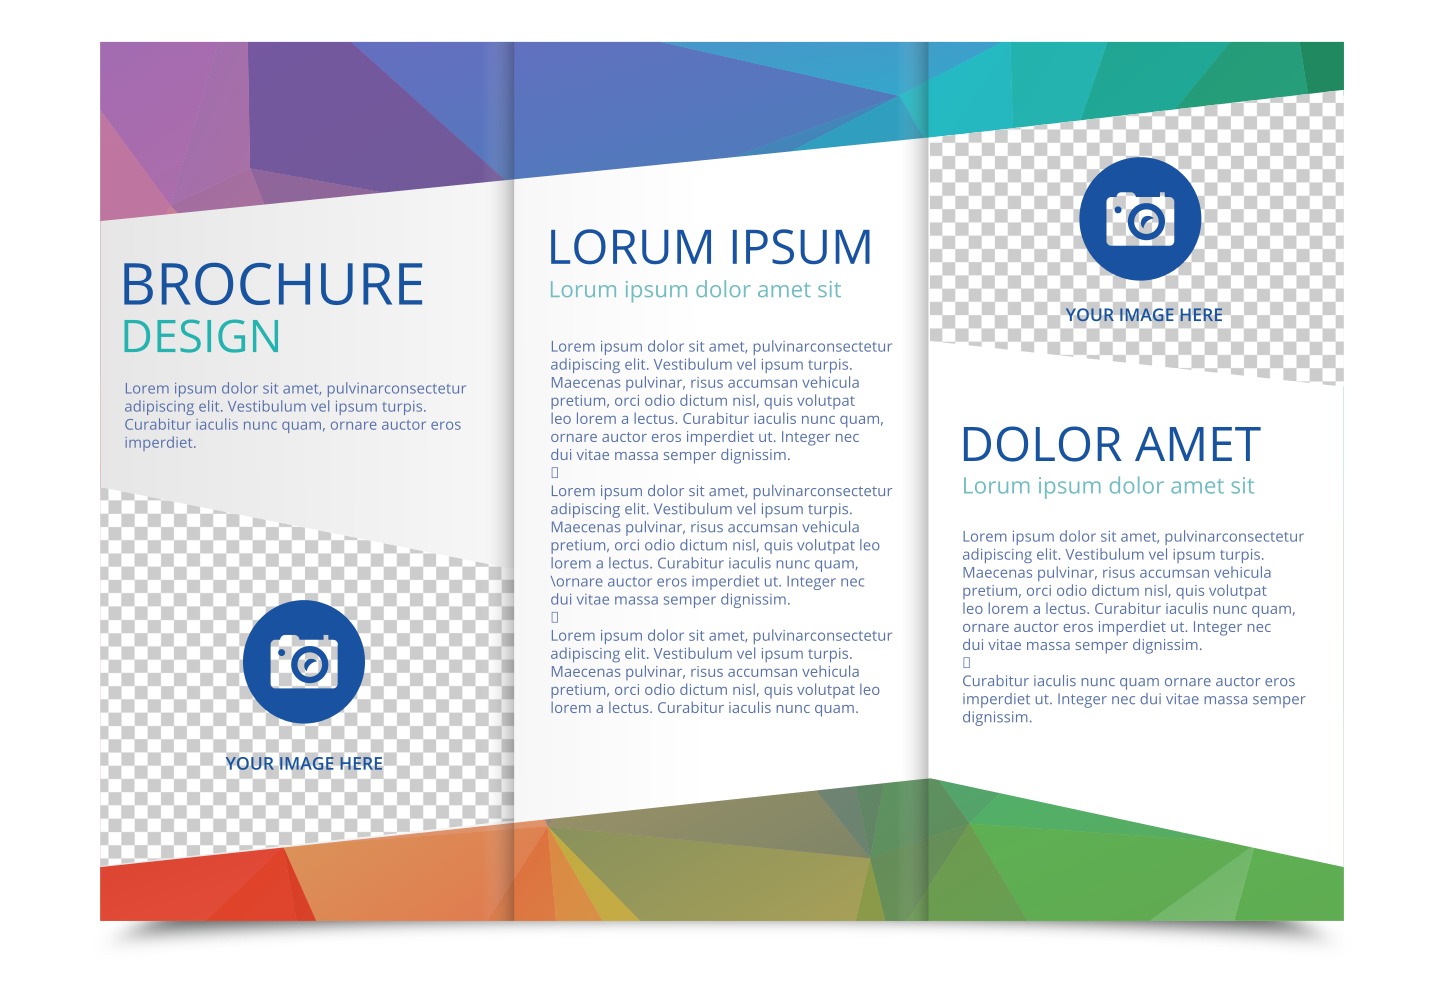 Free indesign flyer templates download